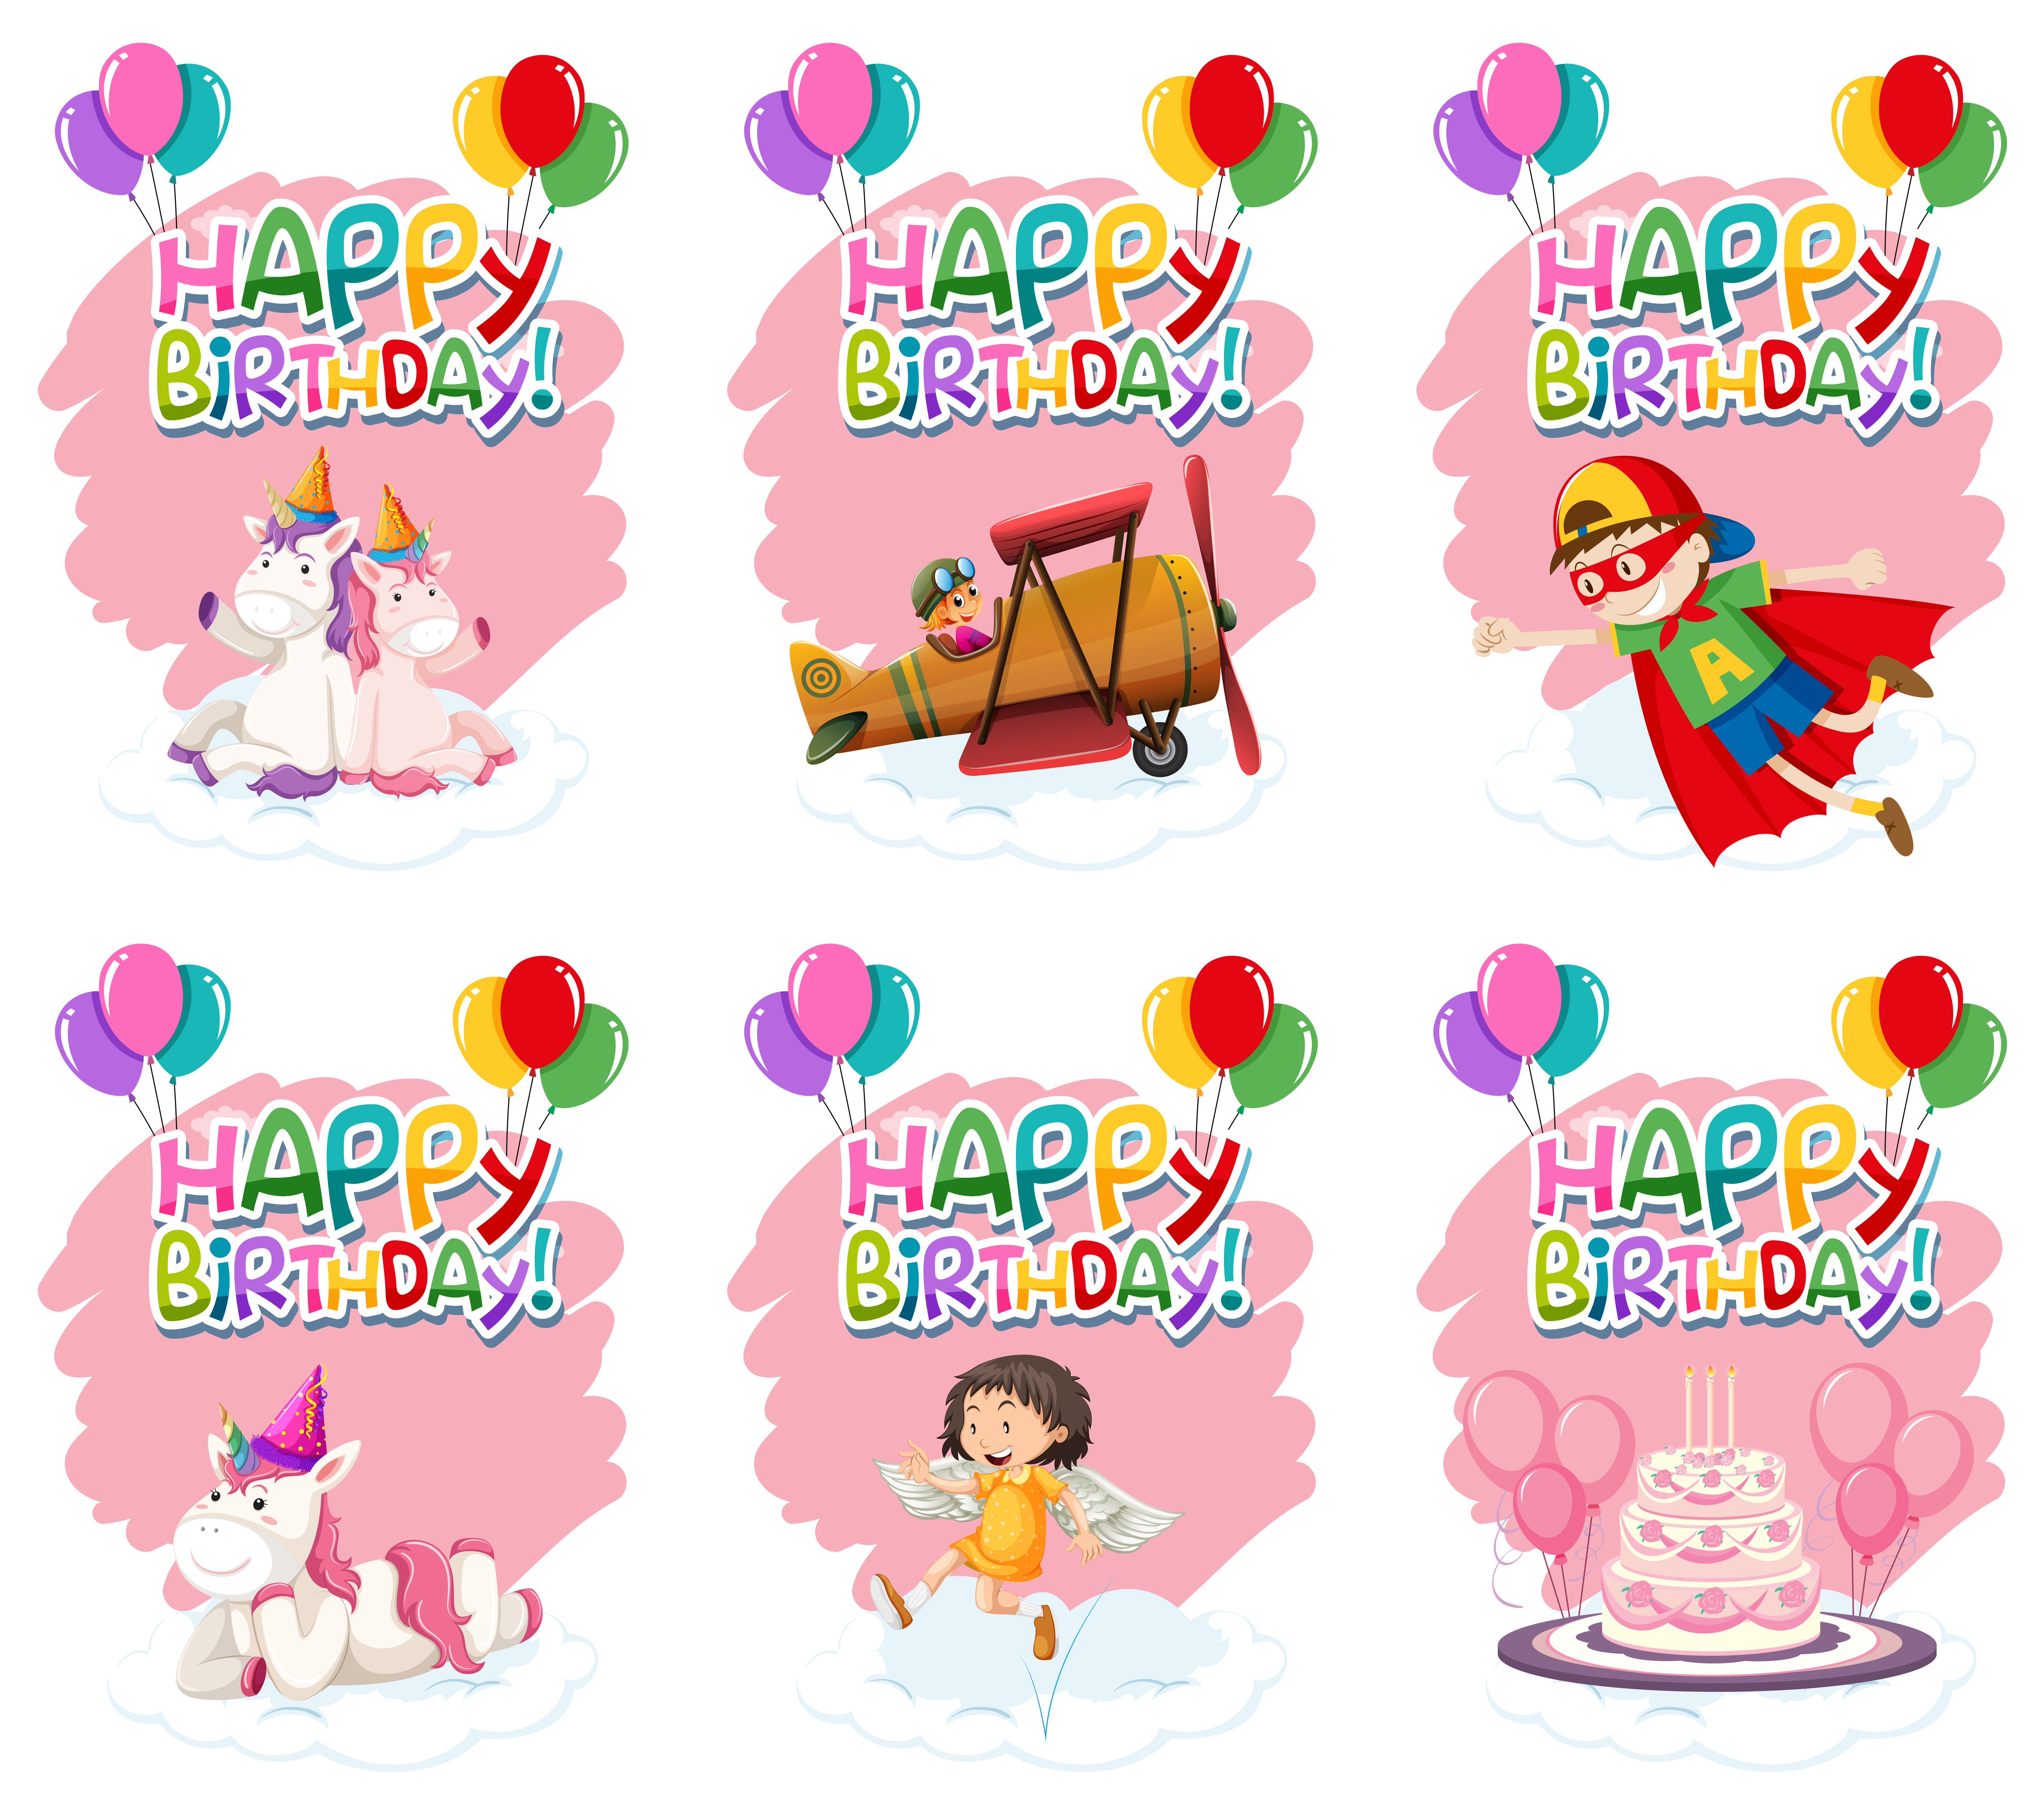 Download Set of cute birthday icon - Download Free Vectors, Clipart ...